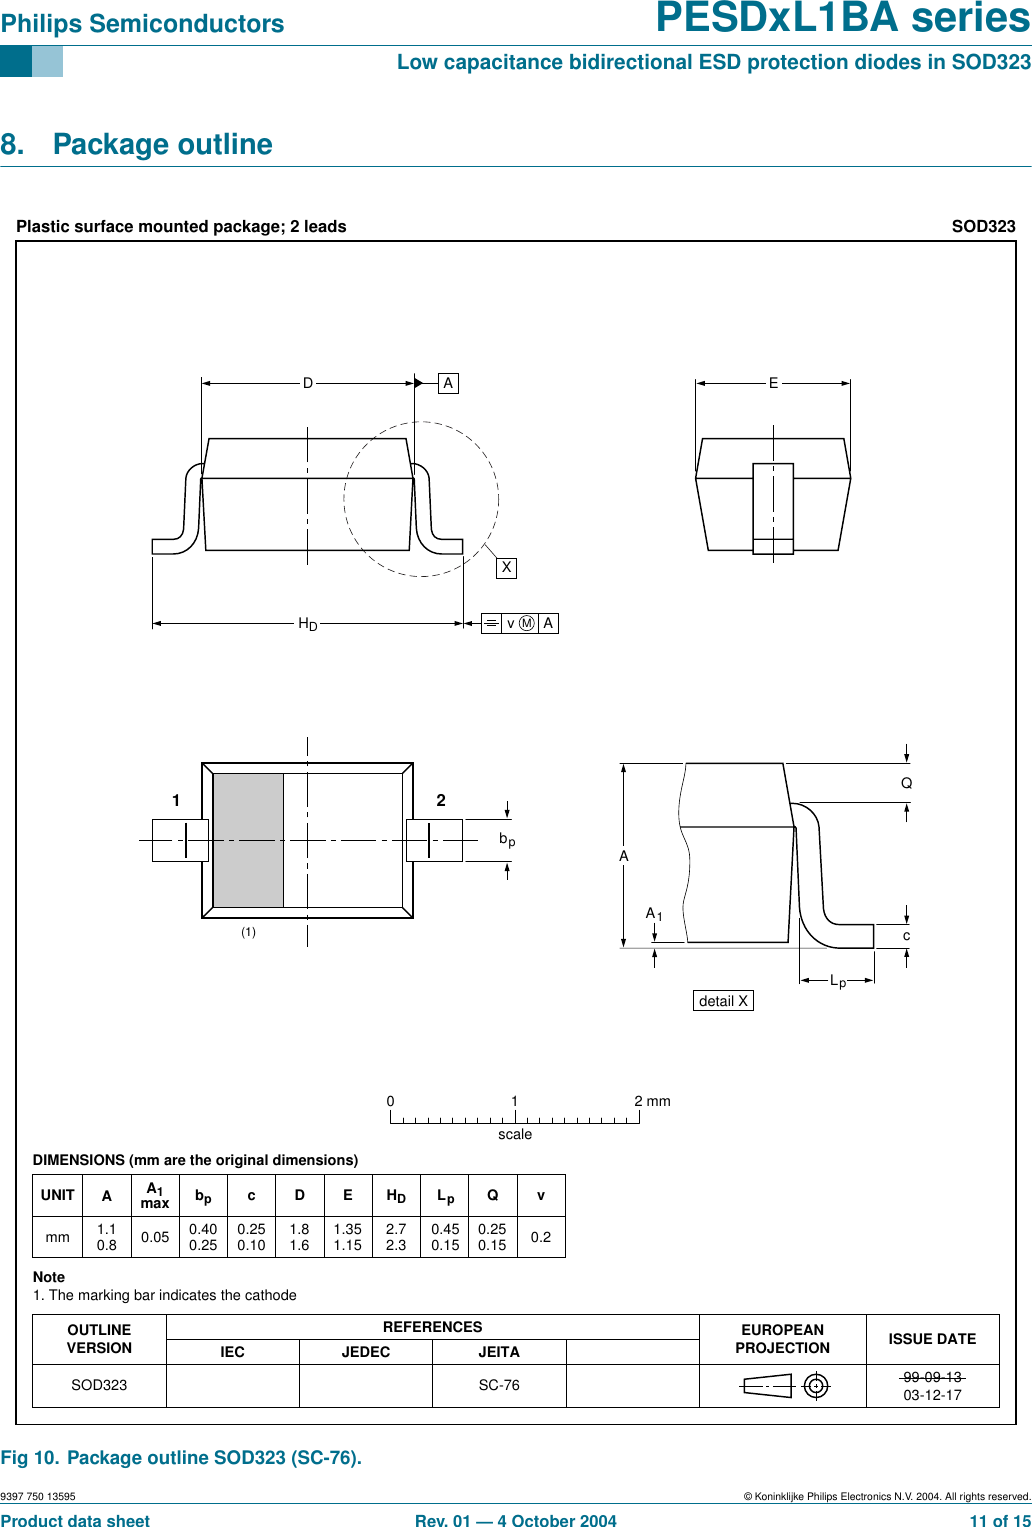 9397 750 13595 © Koninklijke Philips Electronics N.V. 2004. All rights reserved.Product data sheet Rev. 01 — 4 October 2004 11 of 15Philips Semiconductors PESDxL1BA seriesLow capacitance bidirectional ESD protection diodes in SOD3238. Package outlineFig 10. Package outline SOD323 (SC-76).REFERENCESOUTLINEVERSION EUROPEANPROJECTION ISSUE DATEIEC JEDEC JEITASOD323 SC-76SOD32399-09-1303-12-17Note1. The marking bar indicates the cathodeUNIT Amm 0.051.10.8 0.400.25 0.250.10 1.81.6 1.351.15 2.72.3 0.450.15A1maxDIMENSIONS (mm are the original dimensions)Plastic surface mounted package; 2 leads01(1)212 mmscalebpc D E HDQ0.250.15Lpv0.2ADAELpbpdetail XA1cQHDvAMX